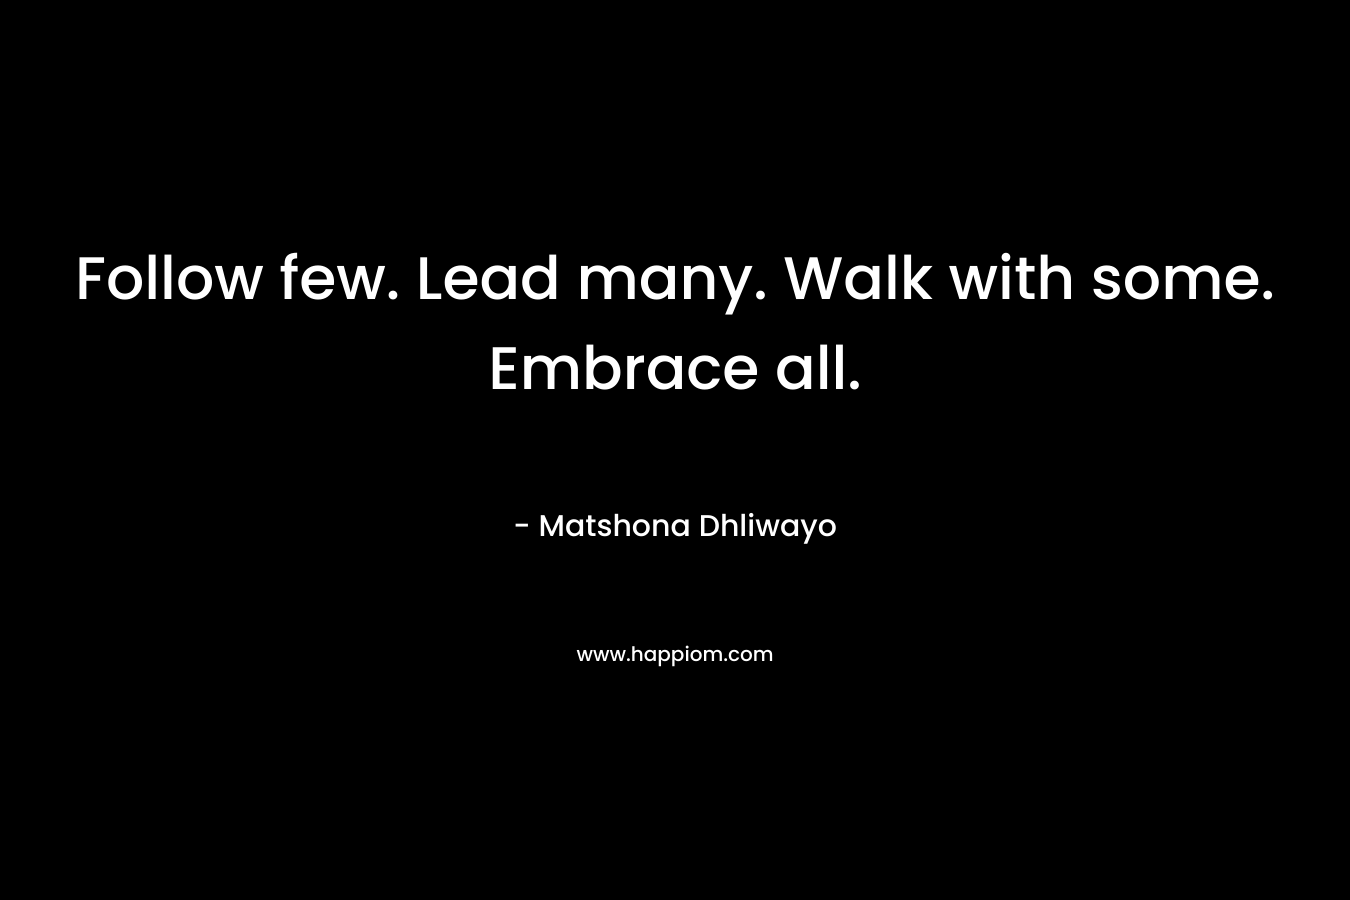 Follow few. Lead many. Walk with some. Embrace all.